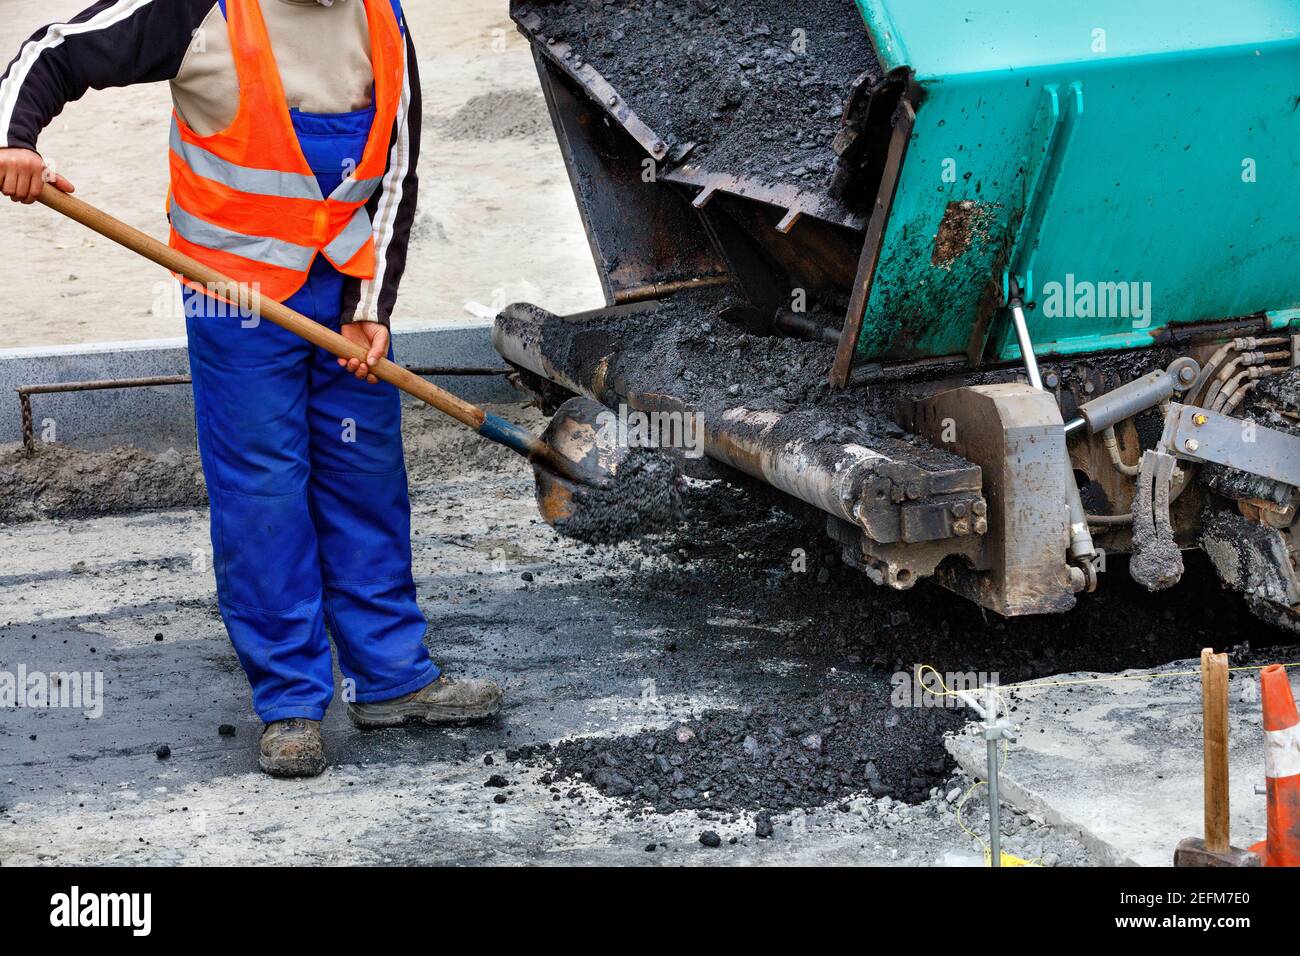 A worker in a blue overalls and an orange jacket cleans an asphalt paver with a shovel. Selective focus. Stock Photo